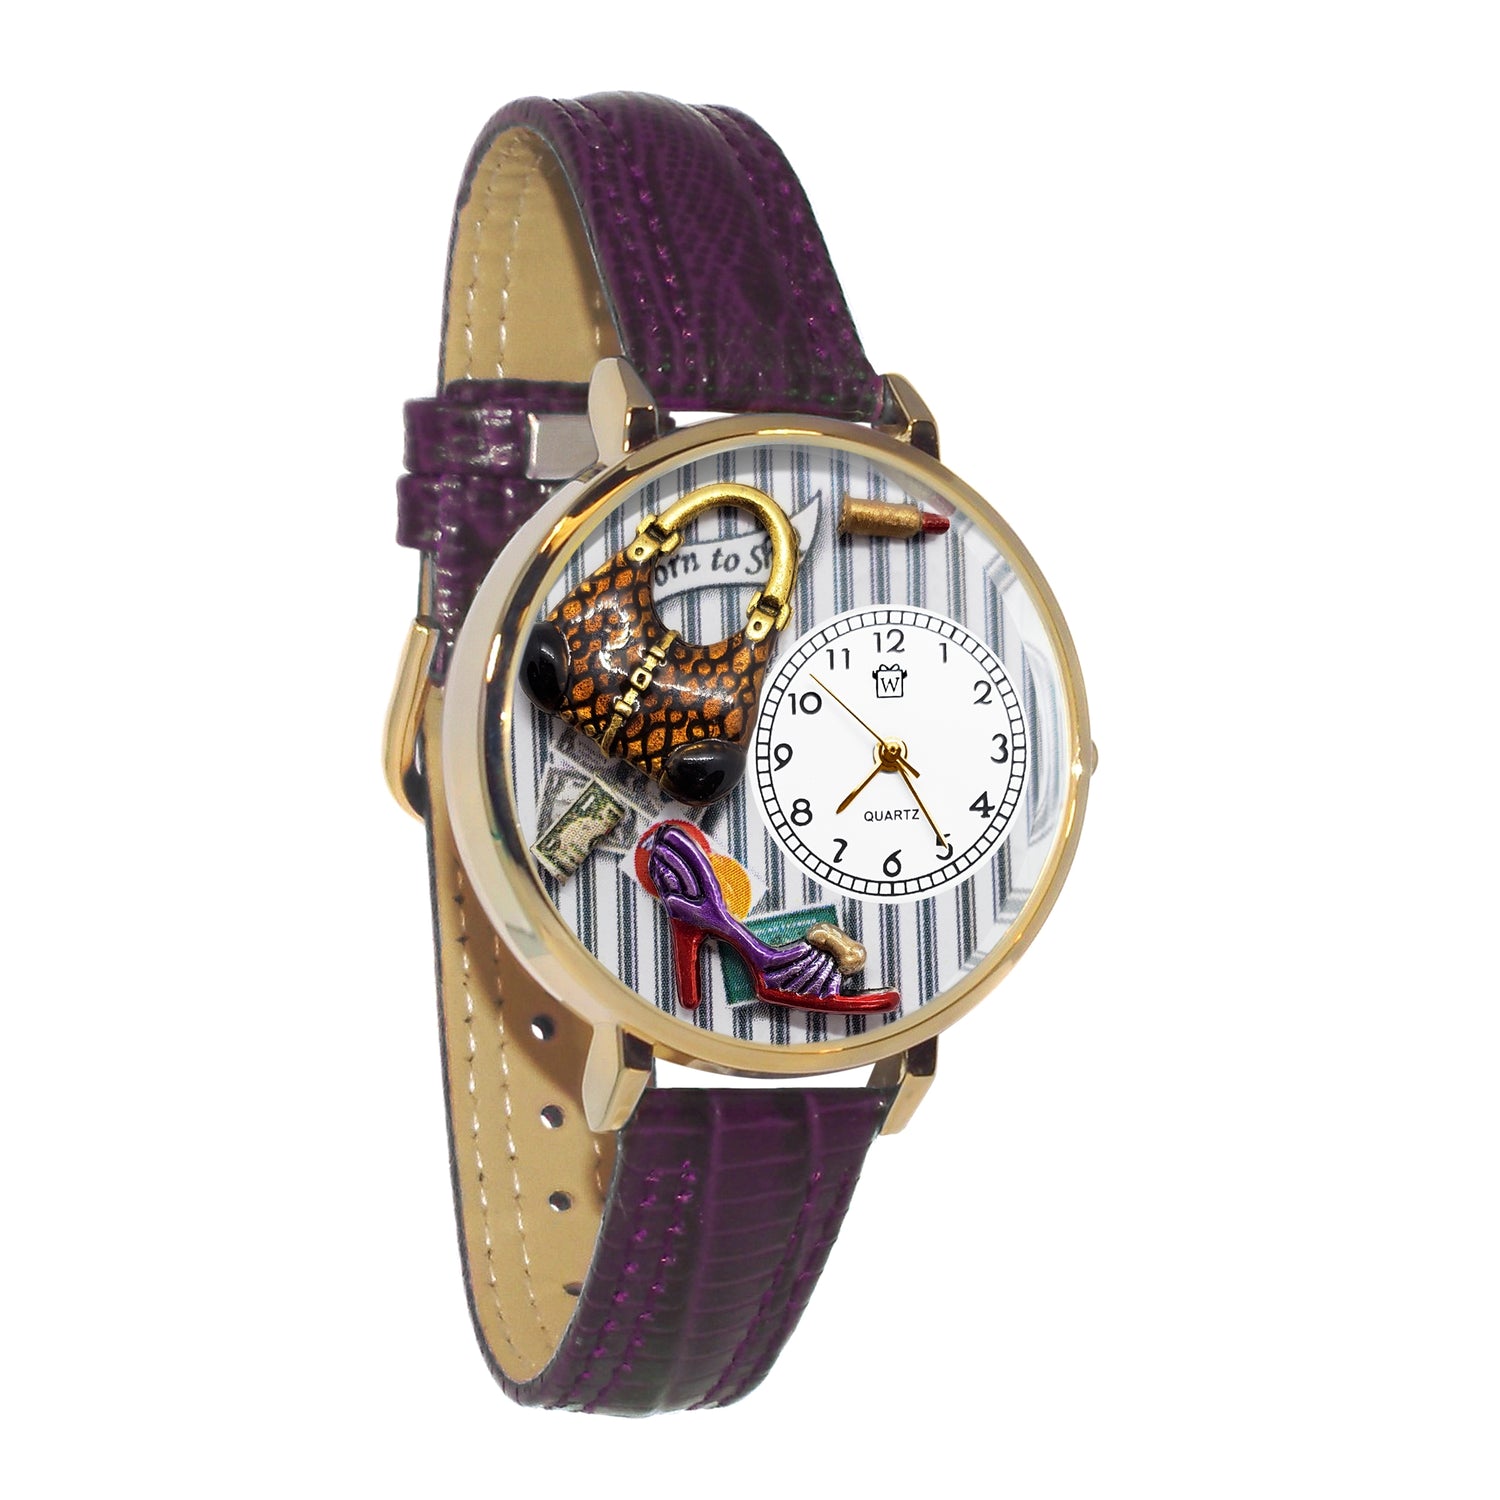 Whimsical Gifts | Fashionista New 3D Watch Large Style | Handmade in USA | Hobbies & Special Interests | Fashionista | Novelty Unique Fun Miniatures Gift | Gold Finish Purple Leather Watch Band